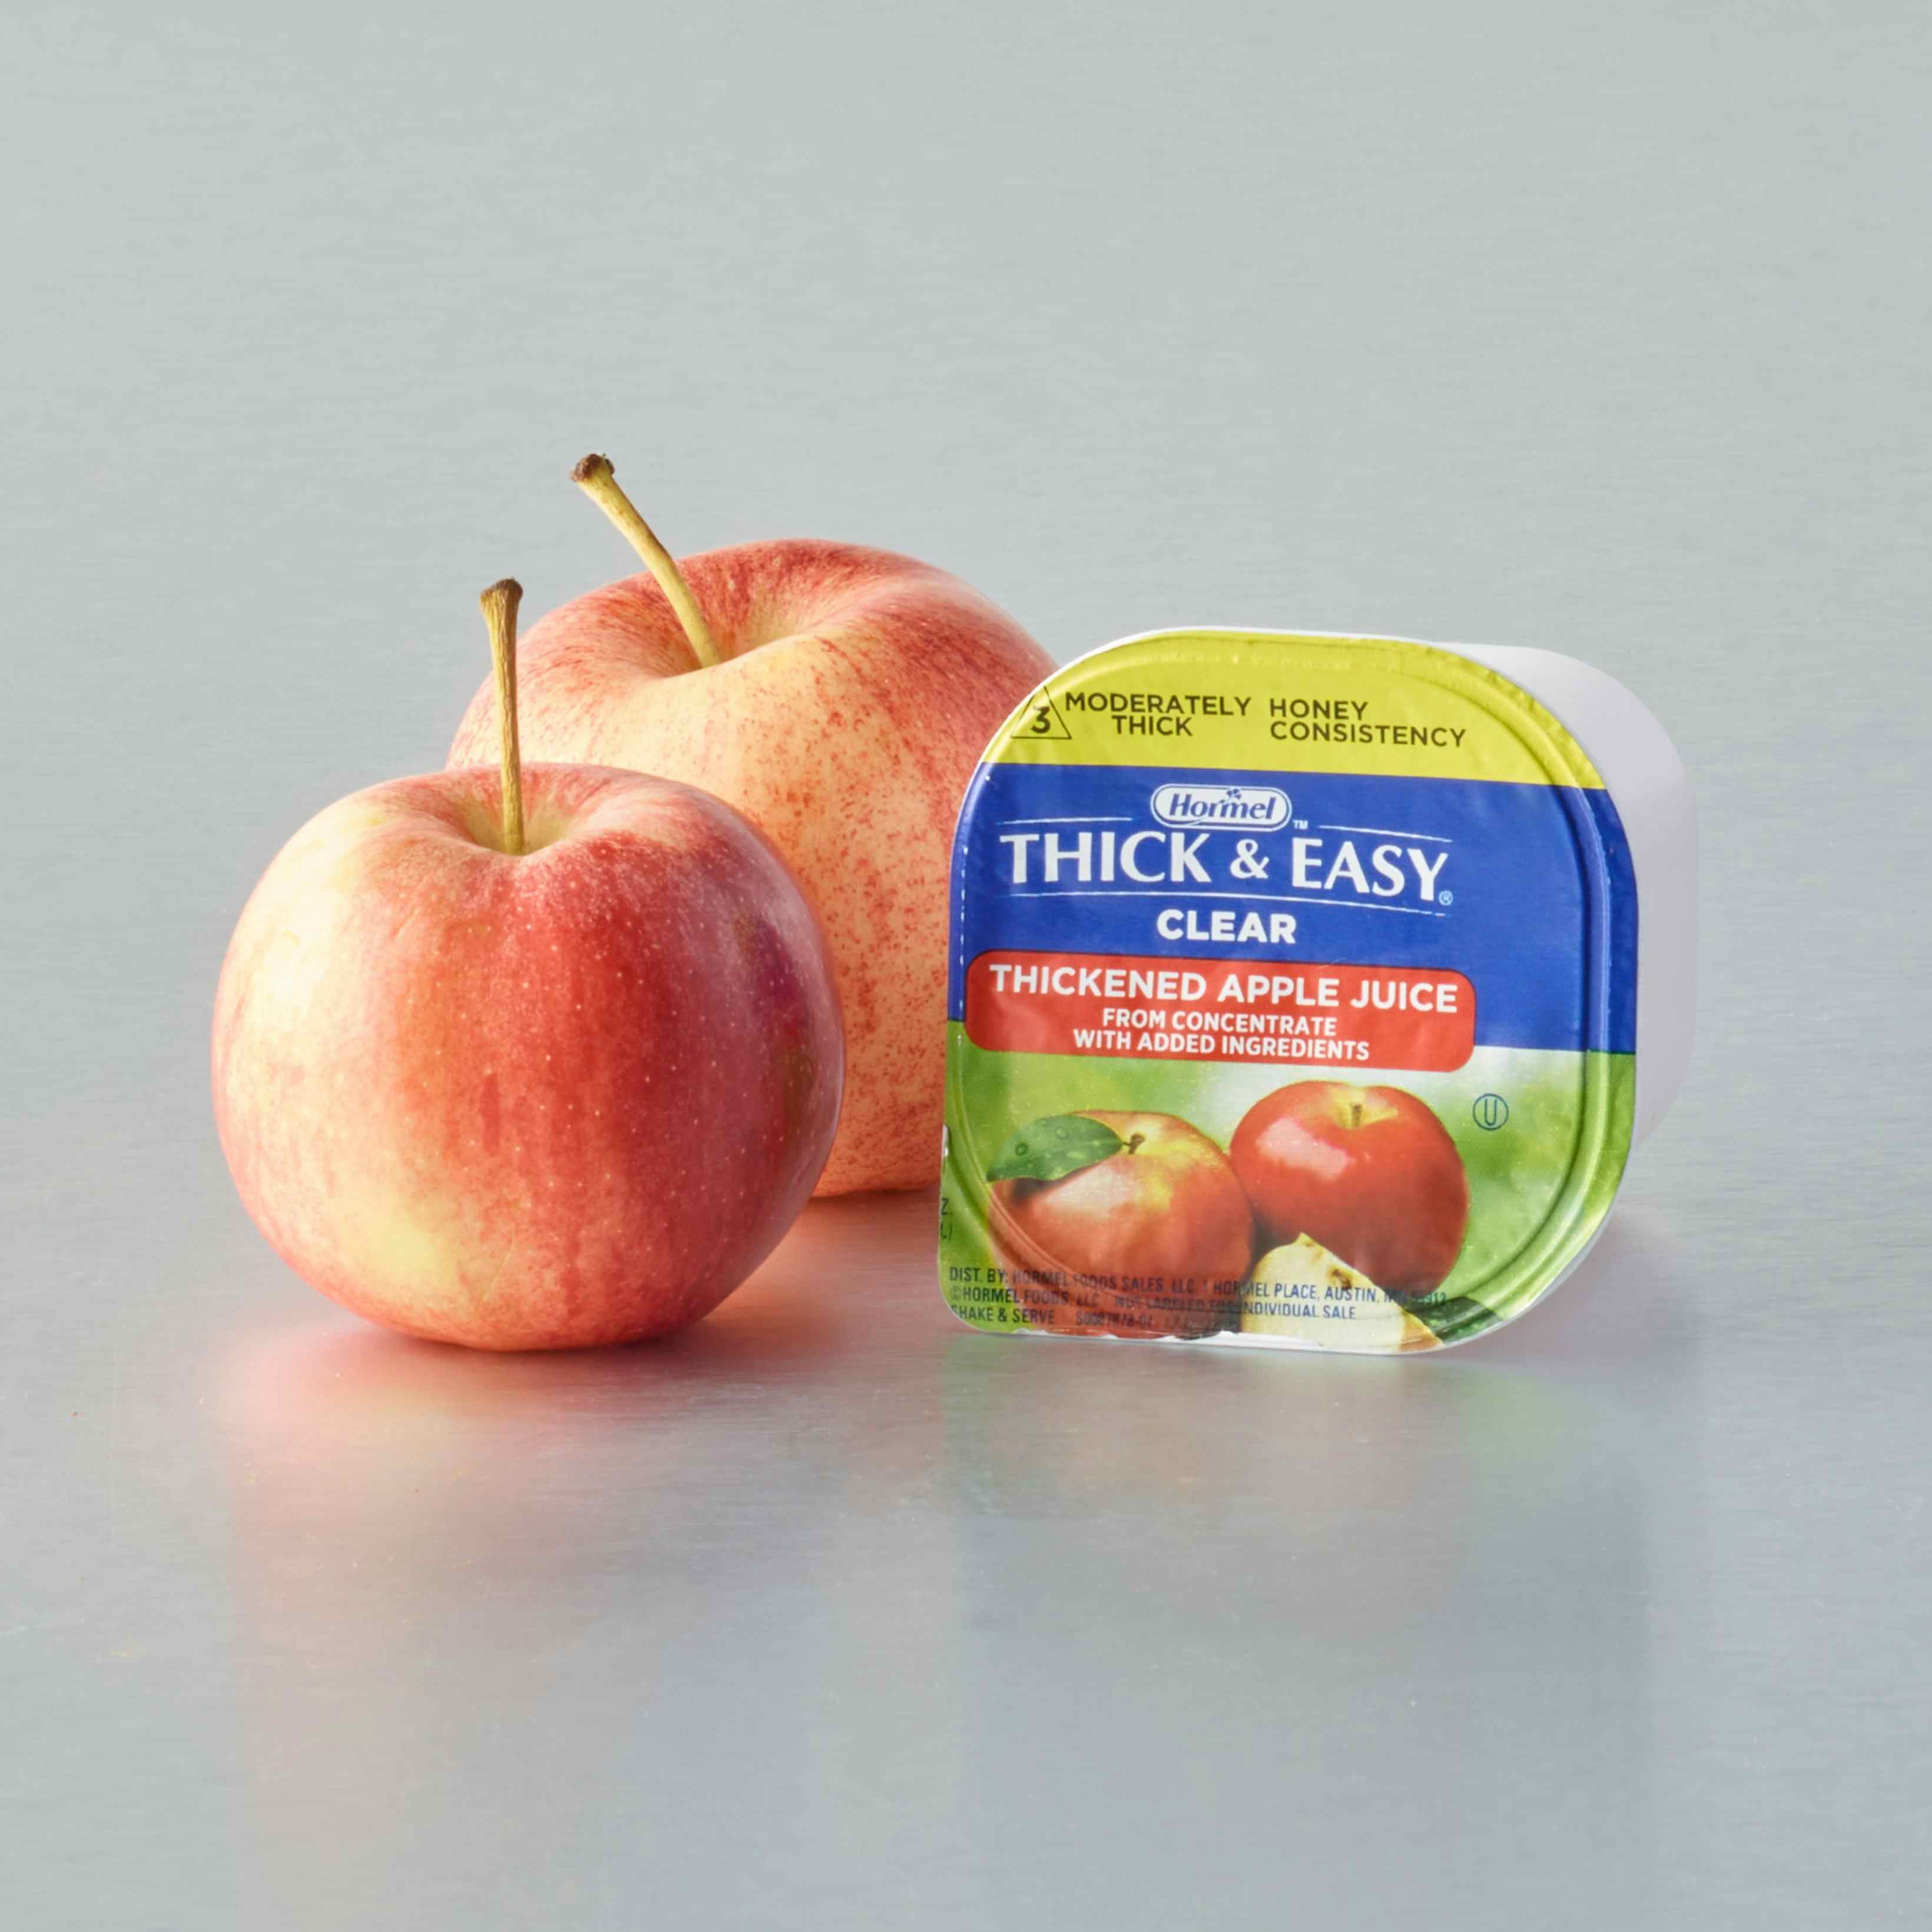 Hormel Thick & Easy Clear Thickened Beverage, Honey Consistency, Moderately Thick, Apple Juice